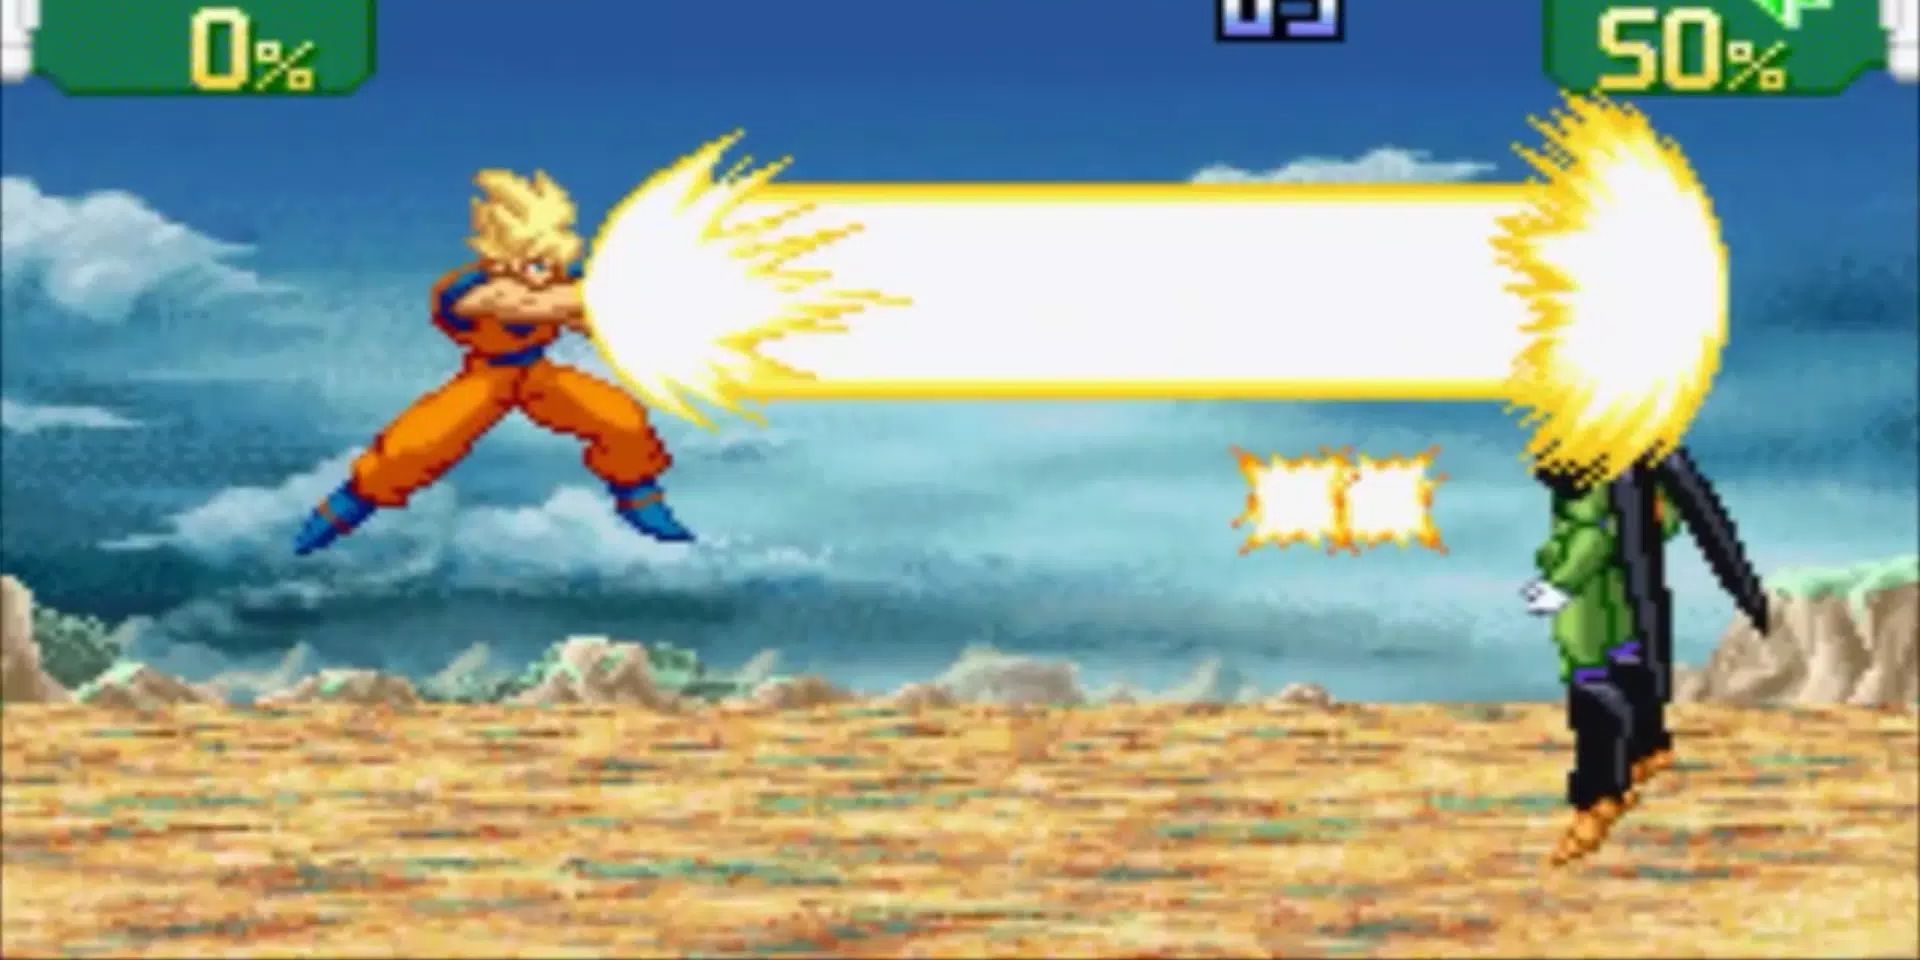 Goku fires a blast at Cell in Dragon Ball Z: Supersonic Warriors for the Game Boy Advance.